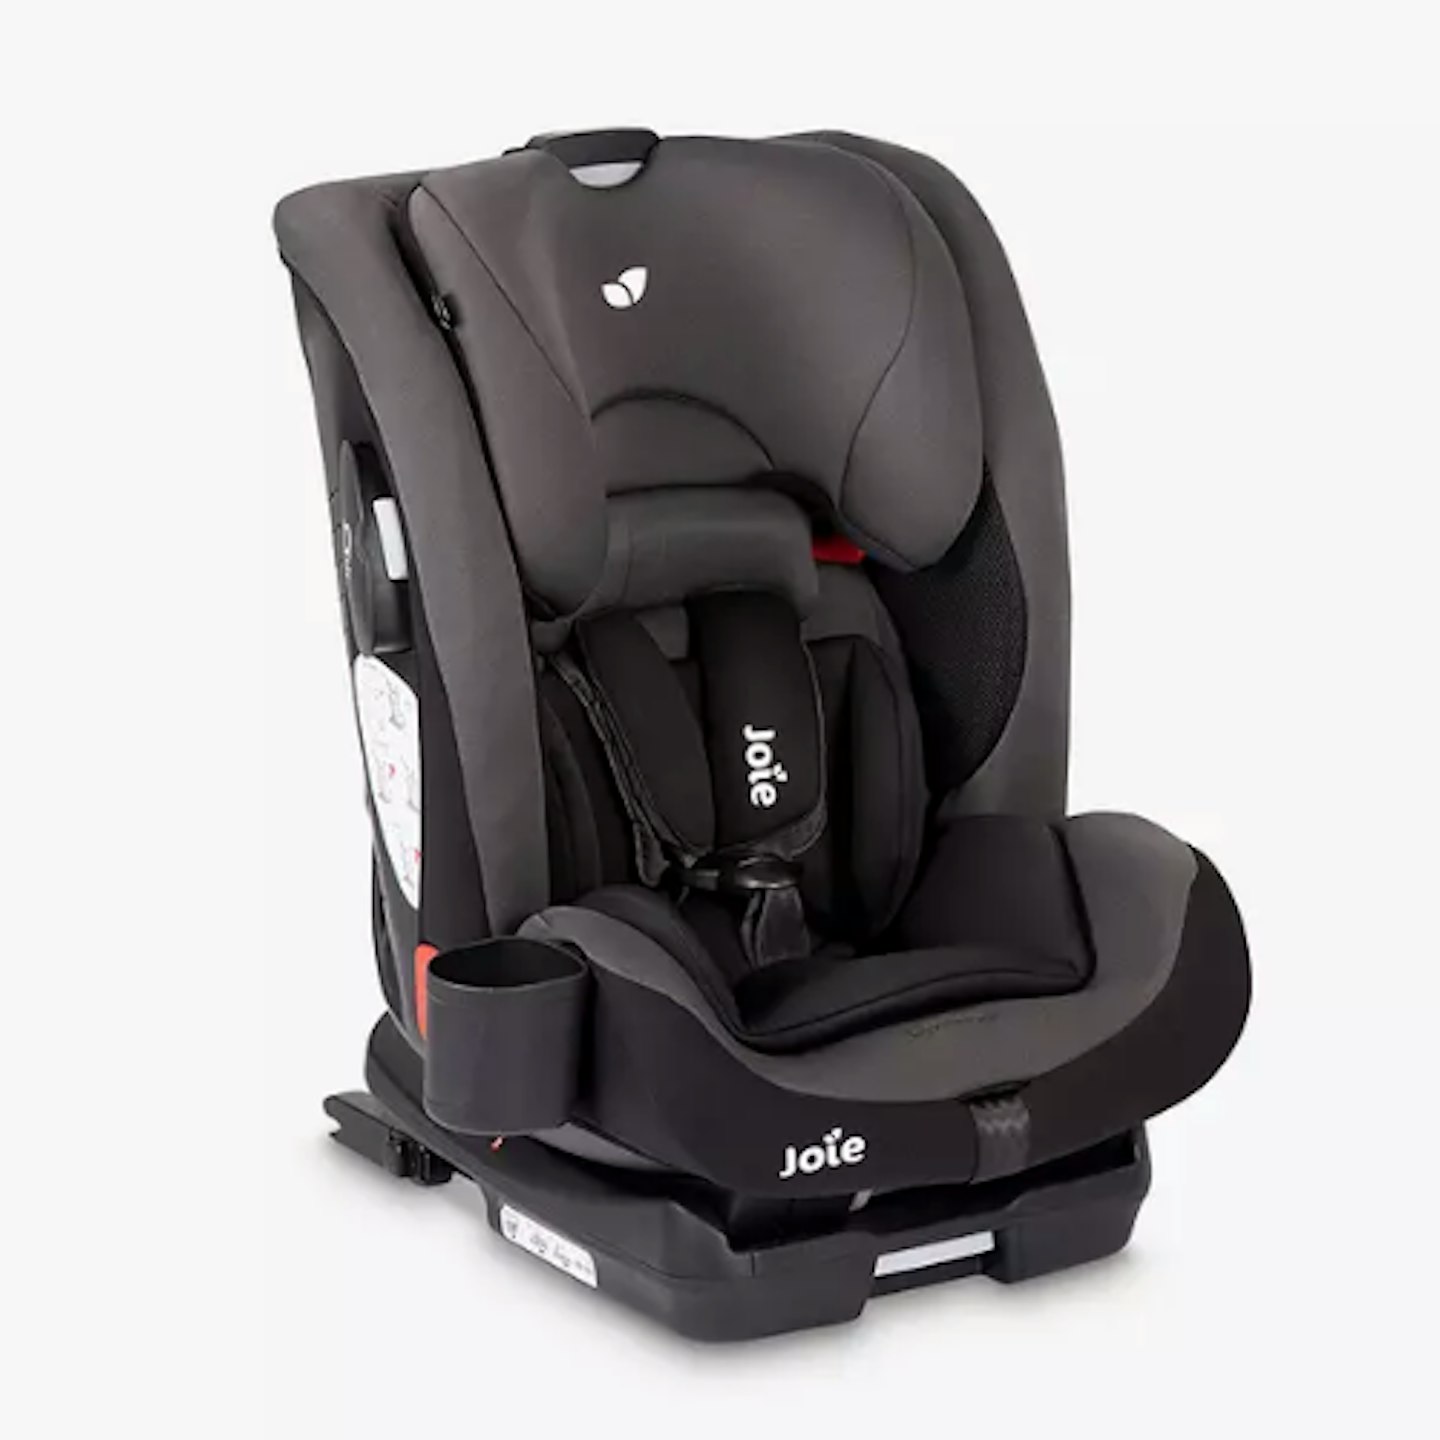 best car seats for 3 year olds - Joie Bold Group 1/2/3 Car Seat